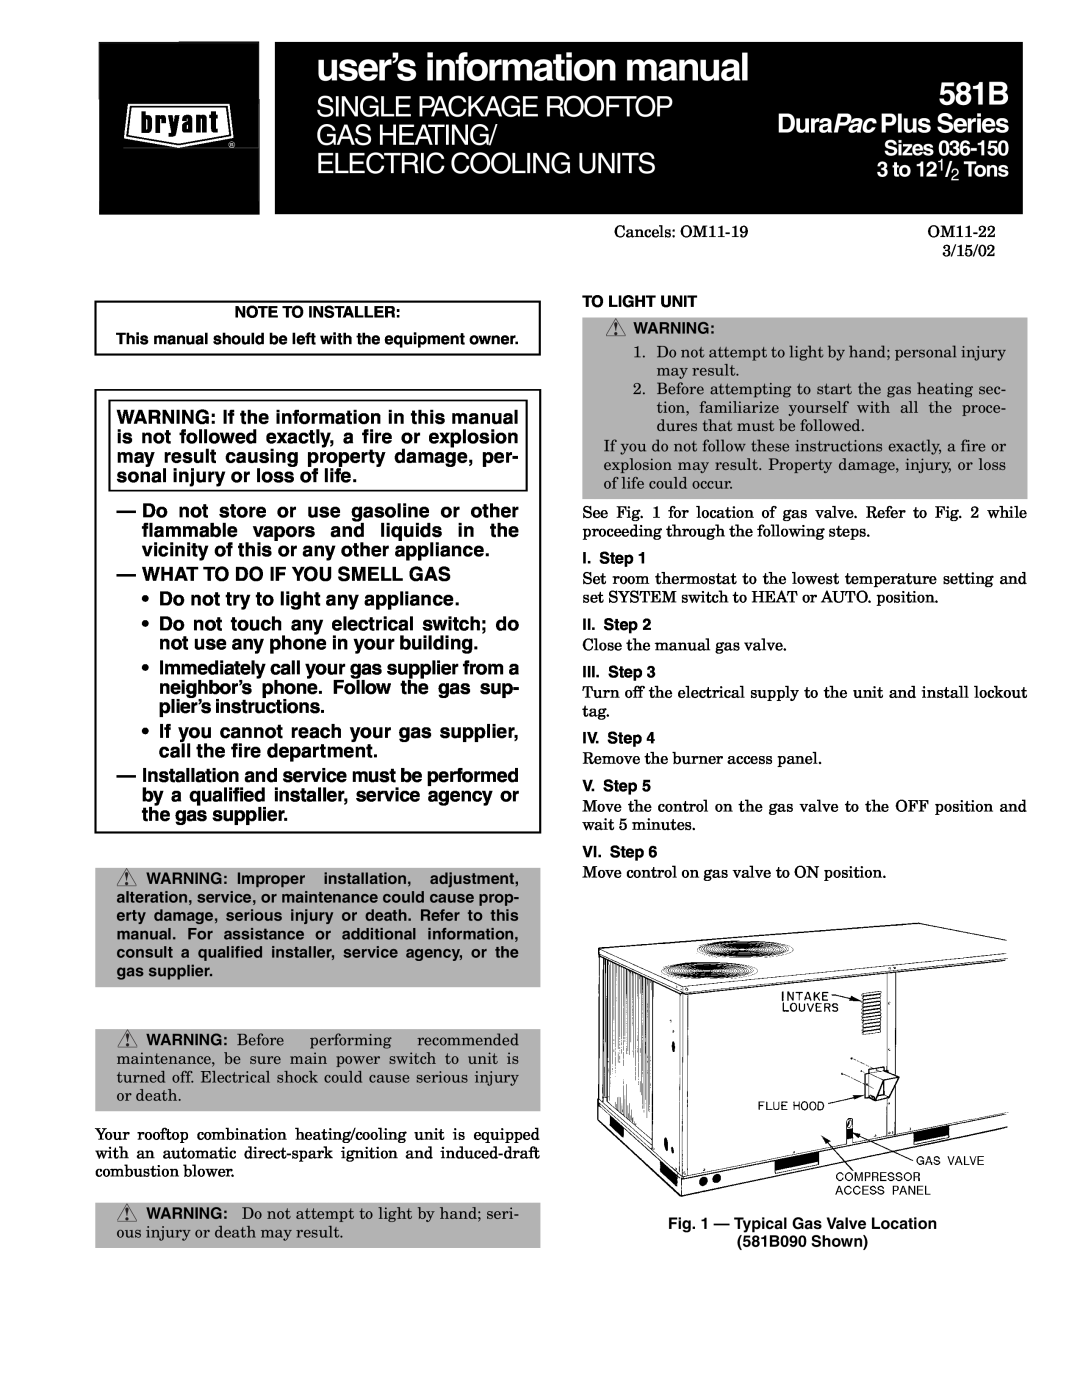 Bryant OM11-19 manual user’s information manual, 581B, Single Package Rooftop, Gas Heating, Electric Cooling Units, Sizes 